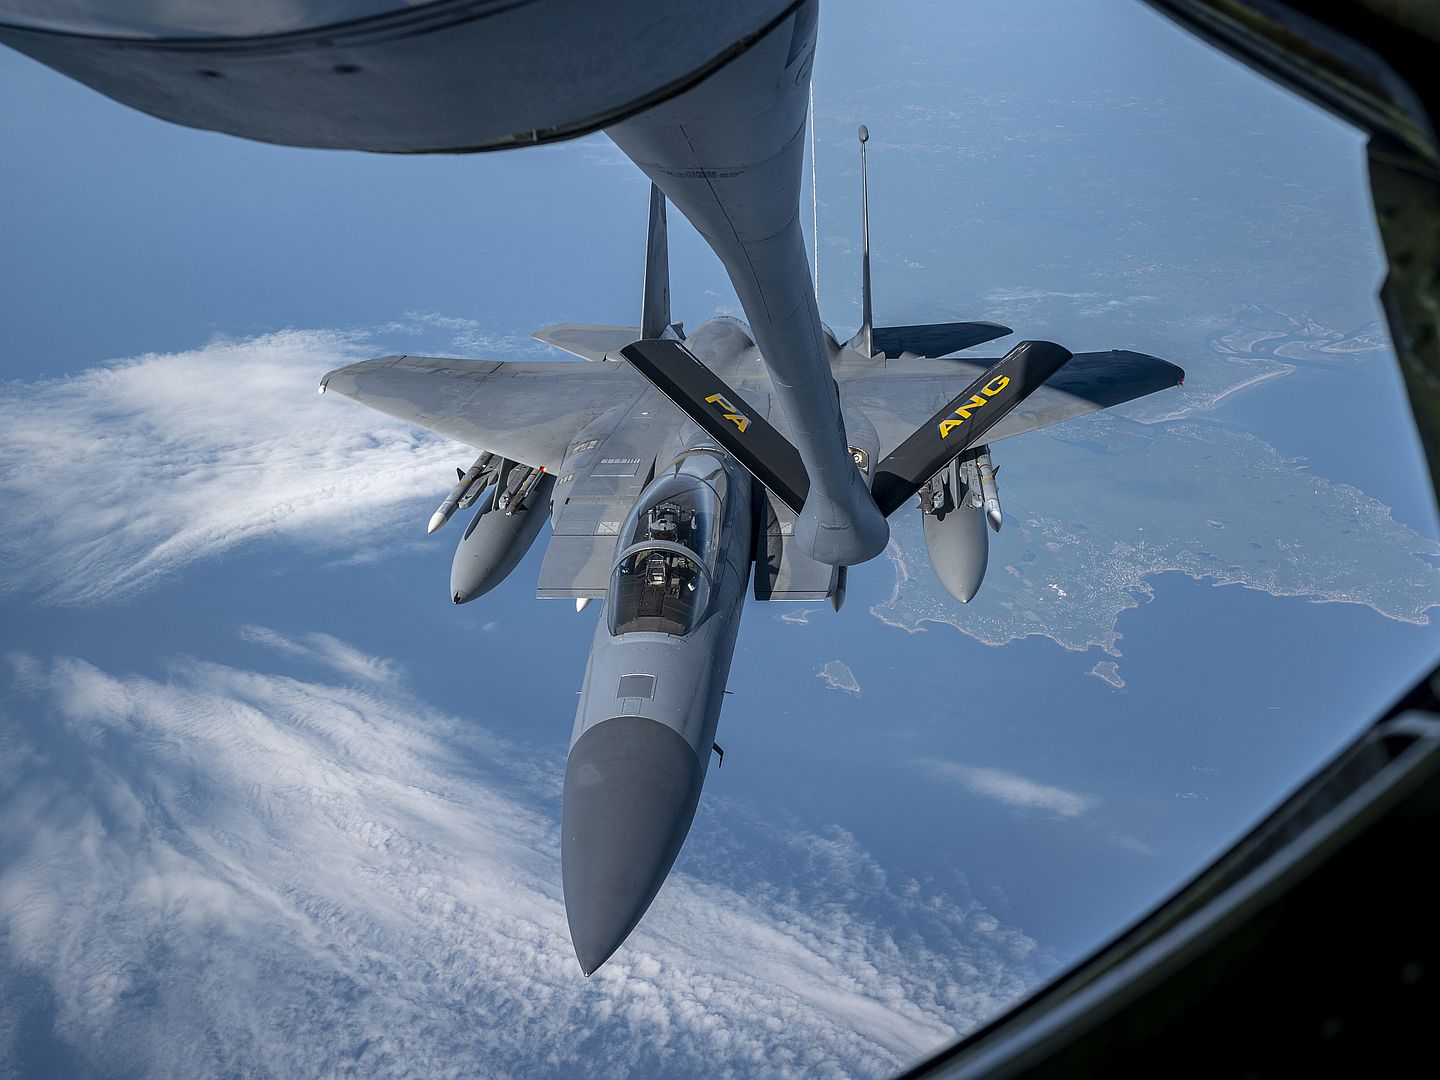 135 Stratotanker Aircraft During North American Air Defense Command Exercise AMALGAM HAWK Conducted On Wednesday May 26 2021